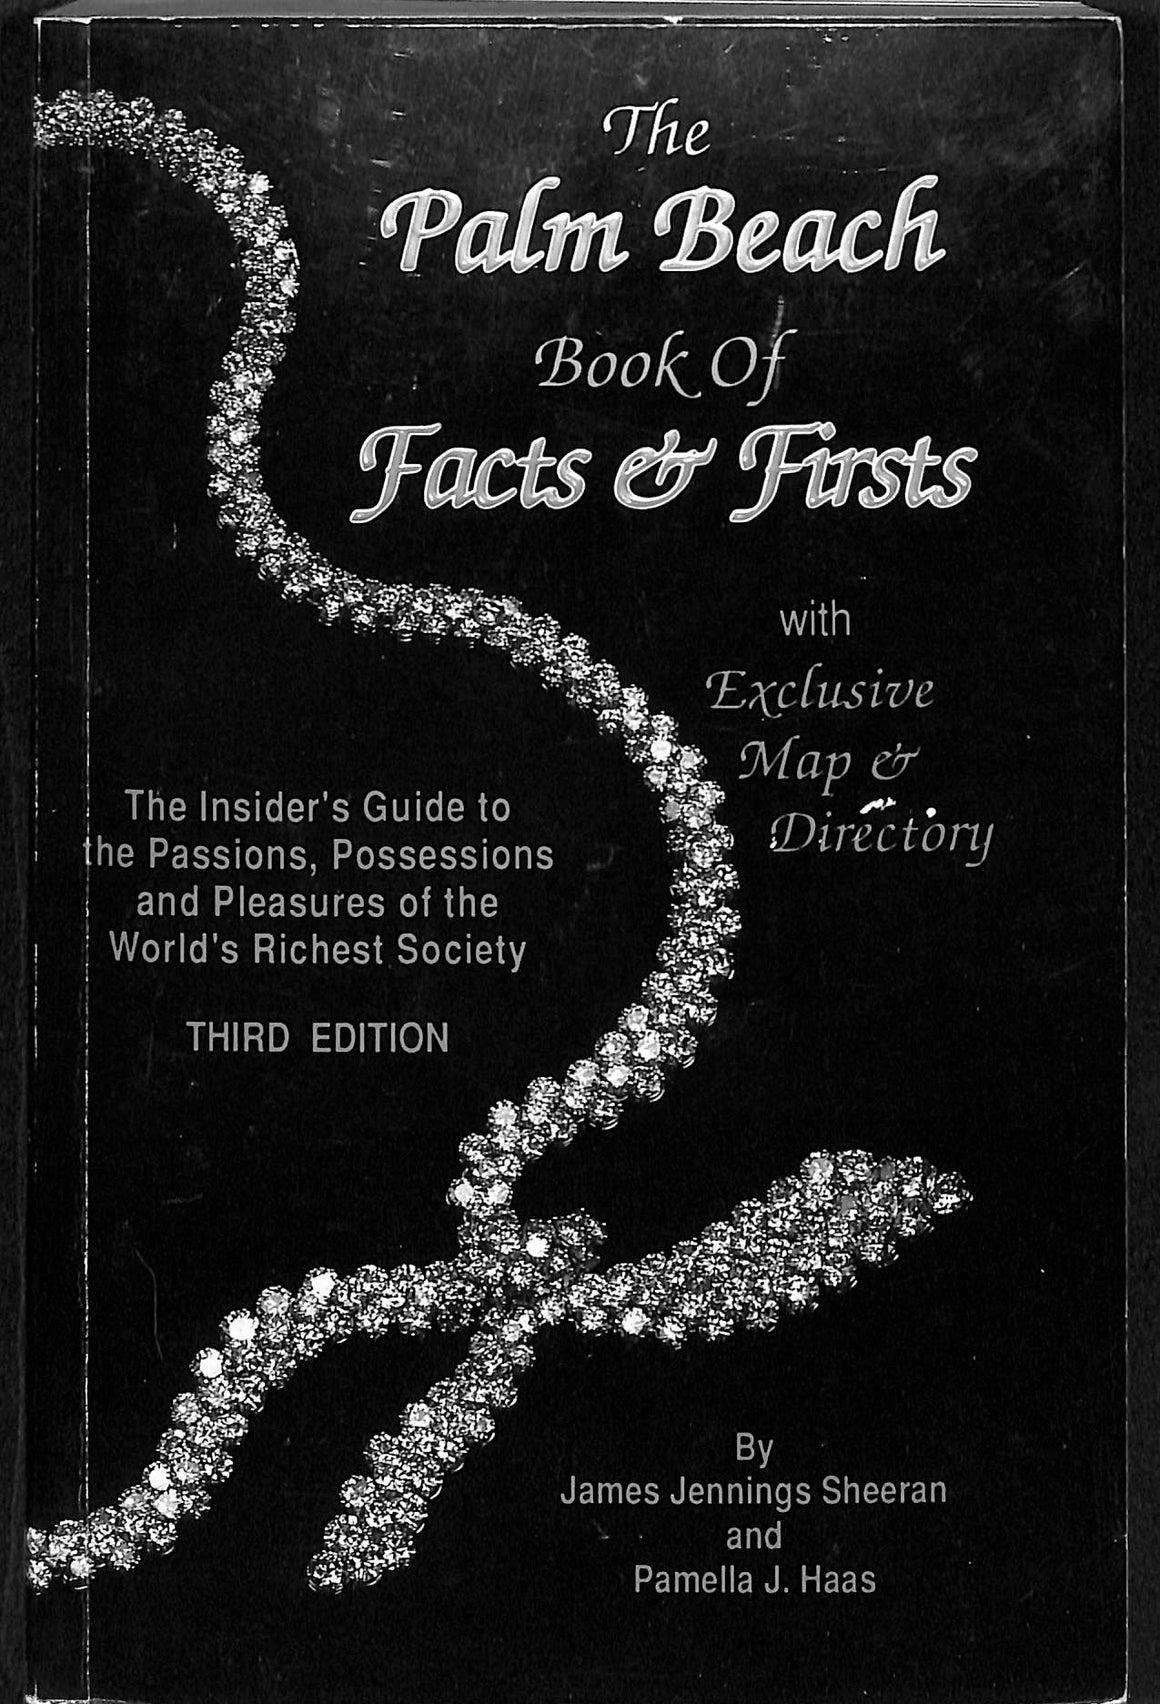 "The Palm Beach Book Of Facts & Firsts" 1991 SHEERAN, James Jennings and HAAS, Pamella J. (SOLD)